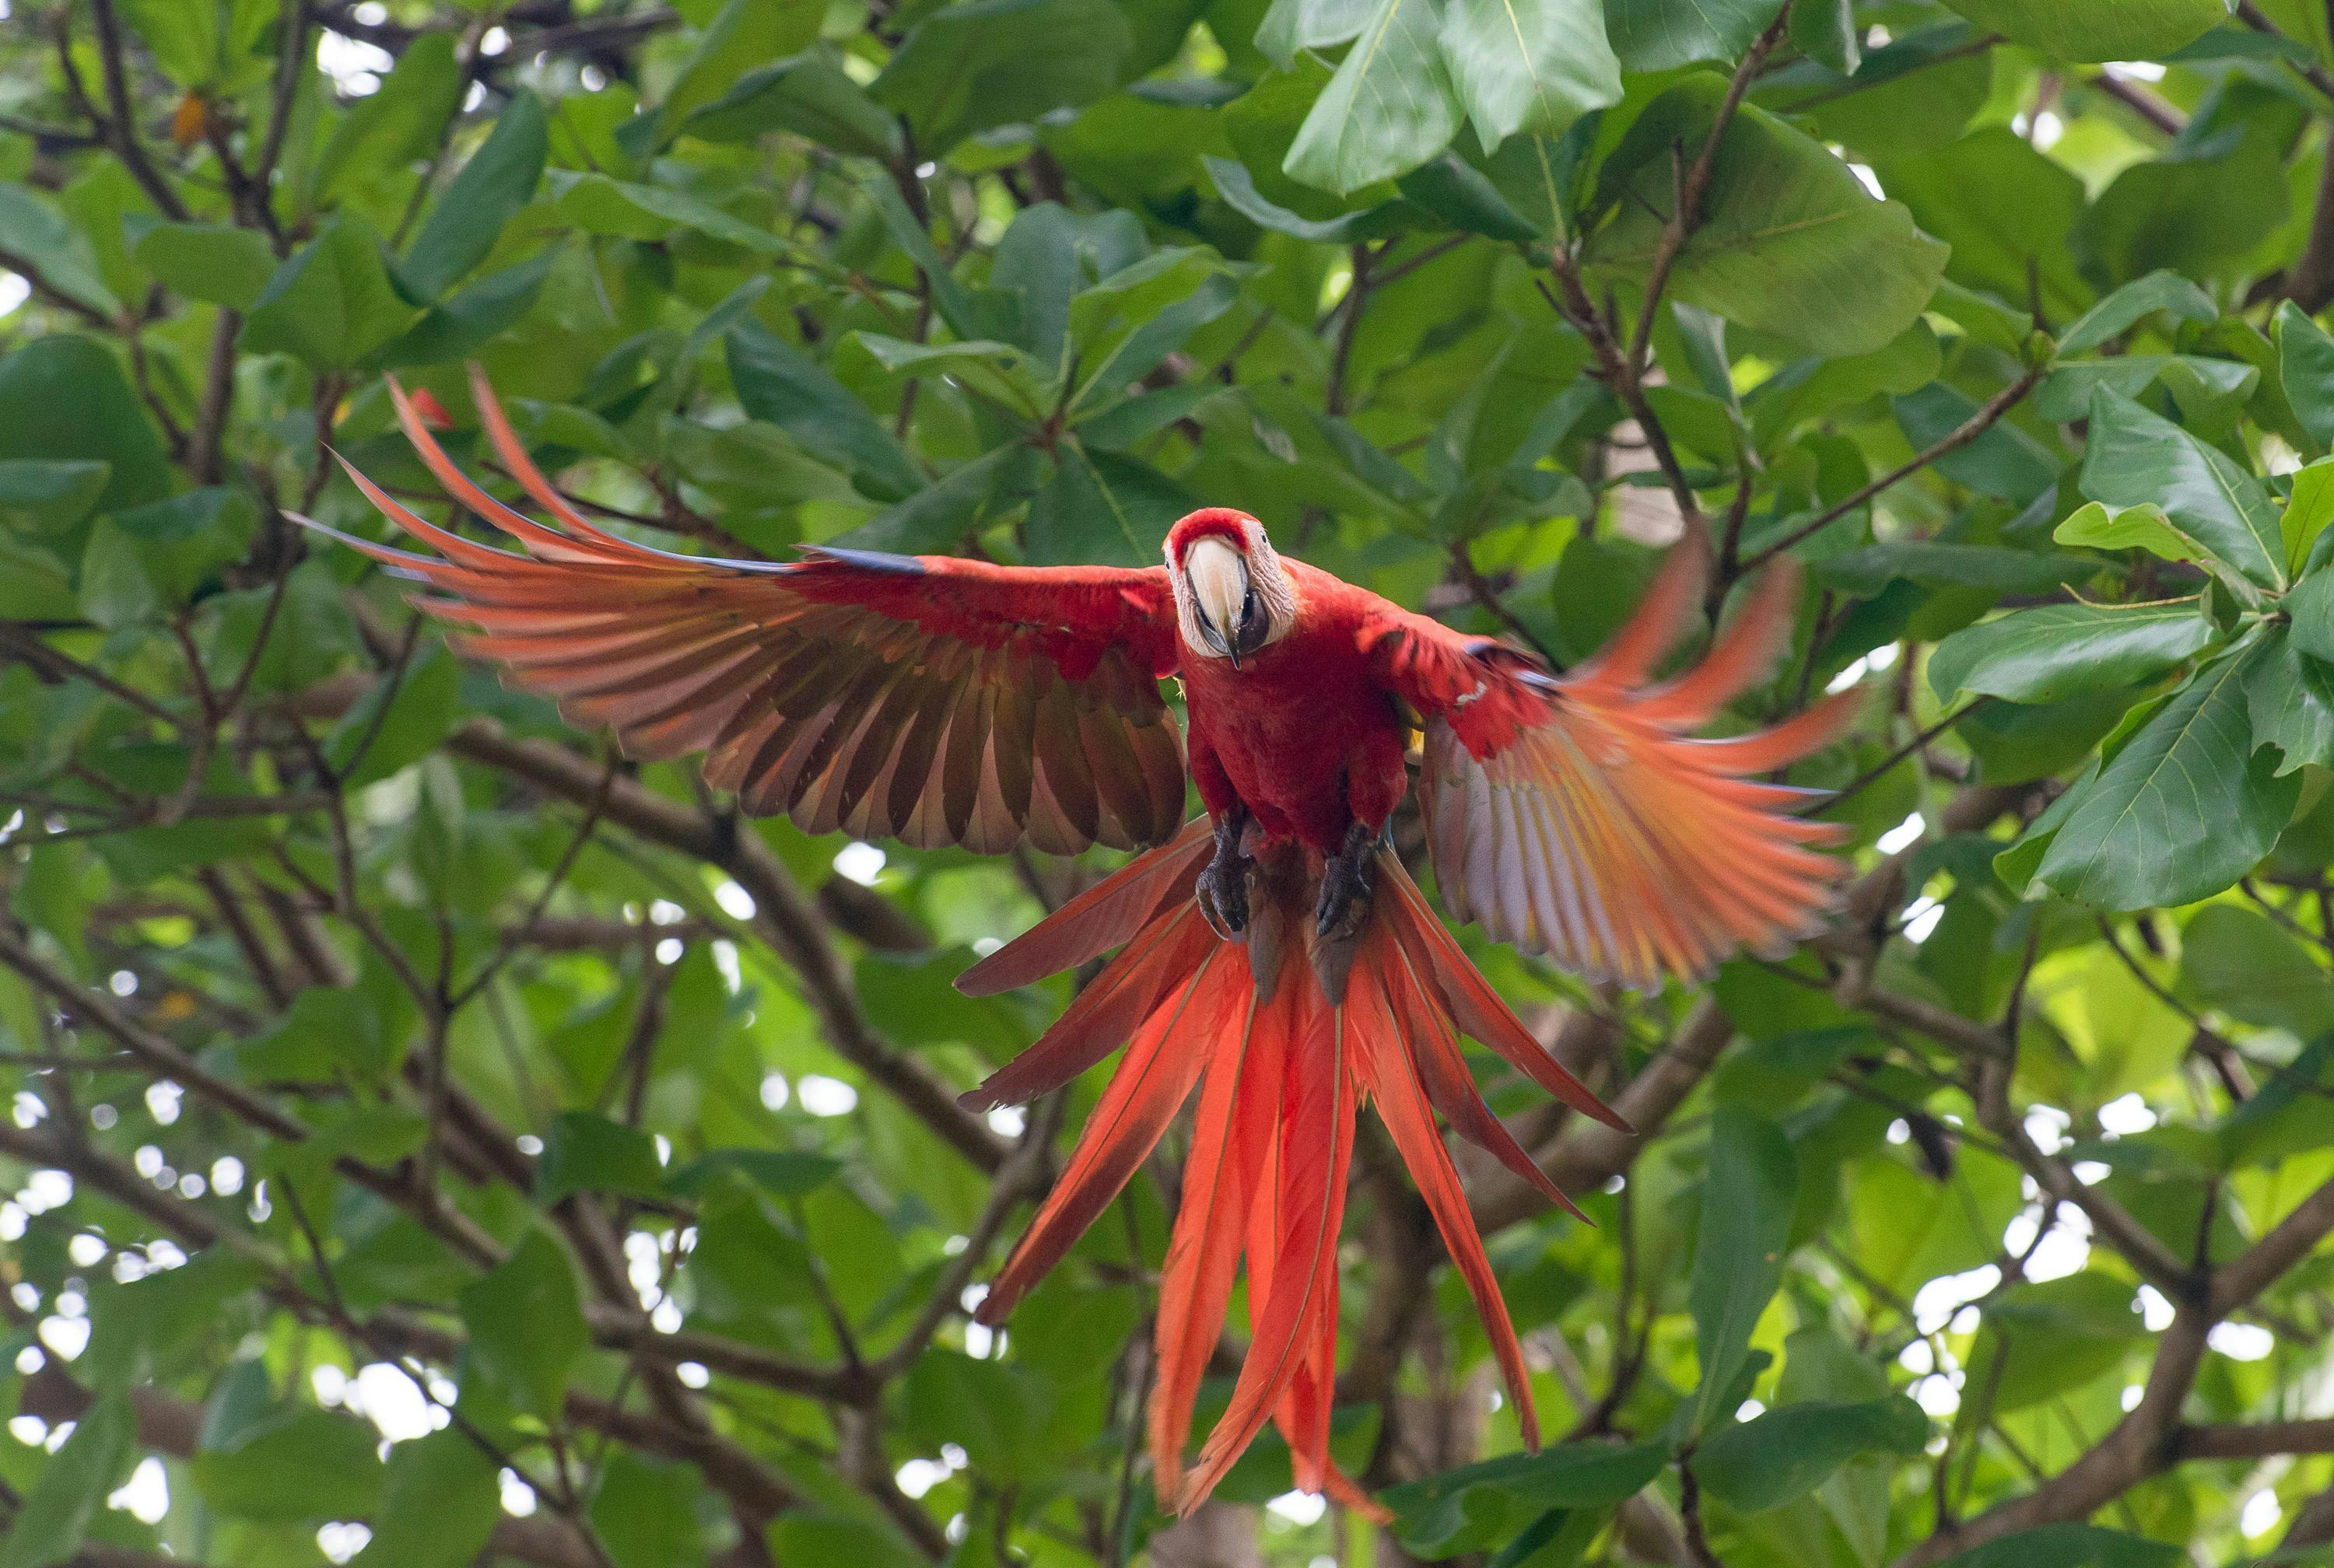 Scarlet macaws in flight over Corcovado National Park, Costa Rica.

Scarlet macaws are a beautiful and iconic species of parrot that are found in the tropical rainforests of Central and South America. They are known for their bright red plumage, blue and yellow wings, and long tails.